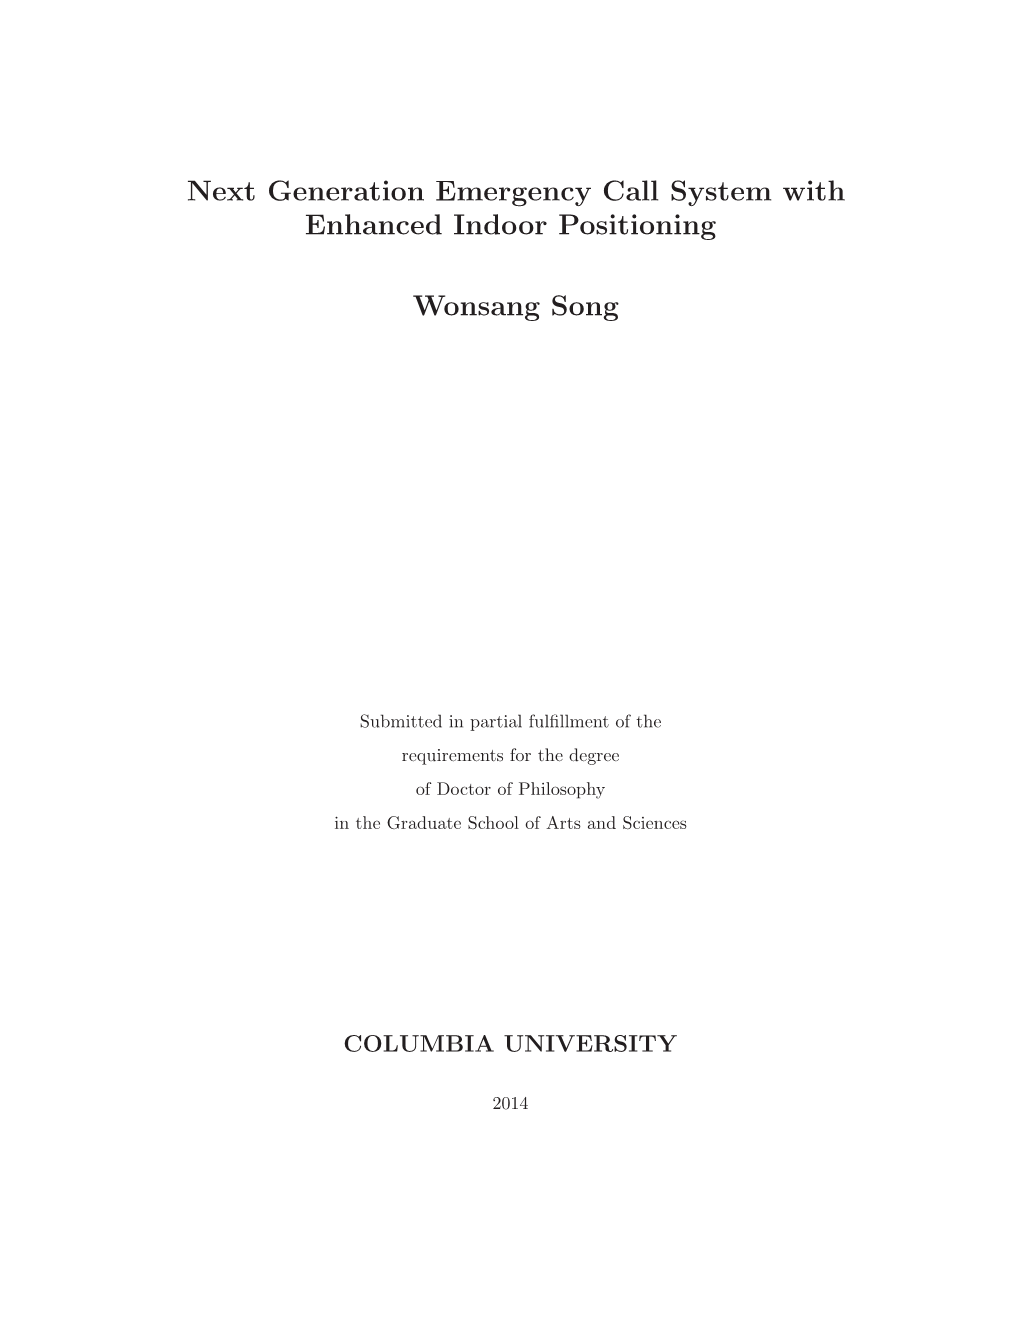 Next Generation Emergency Call System with Enhanced Indoor Positioning